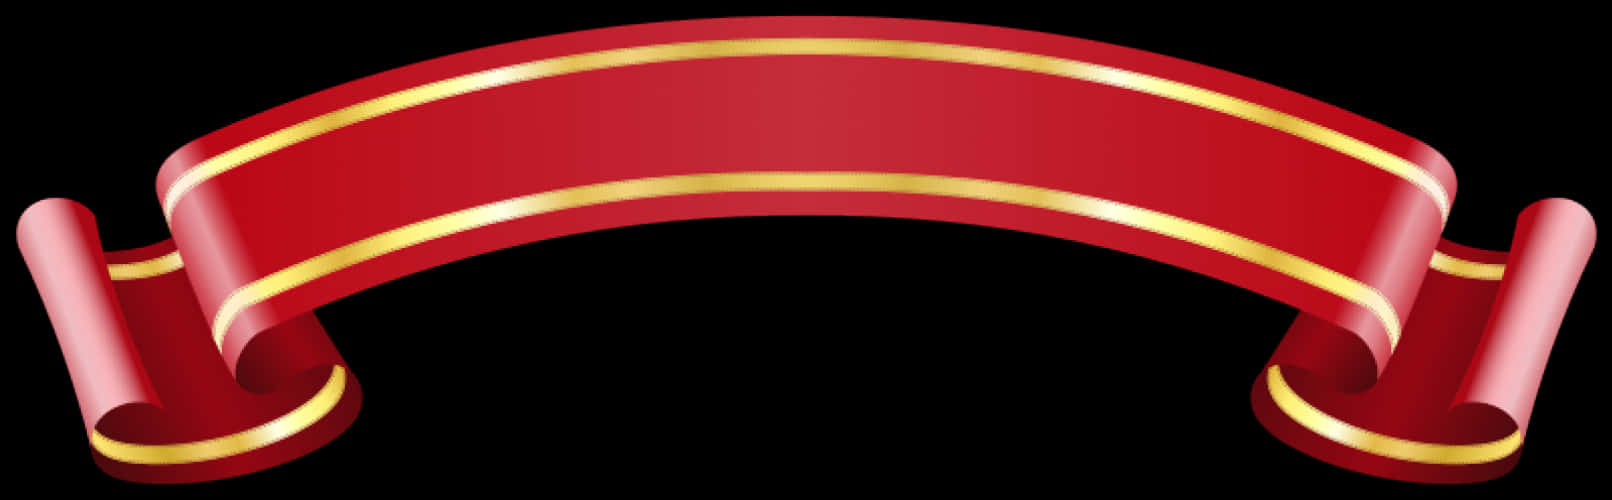 A Red And Gold Ribbon